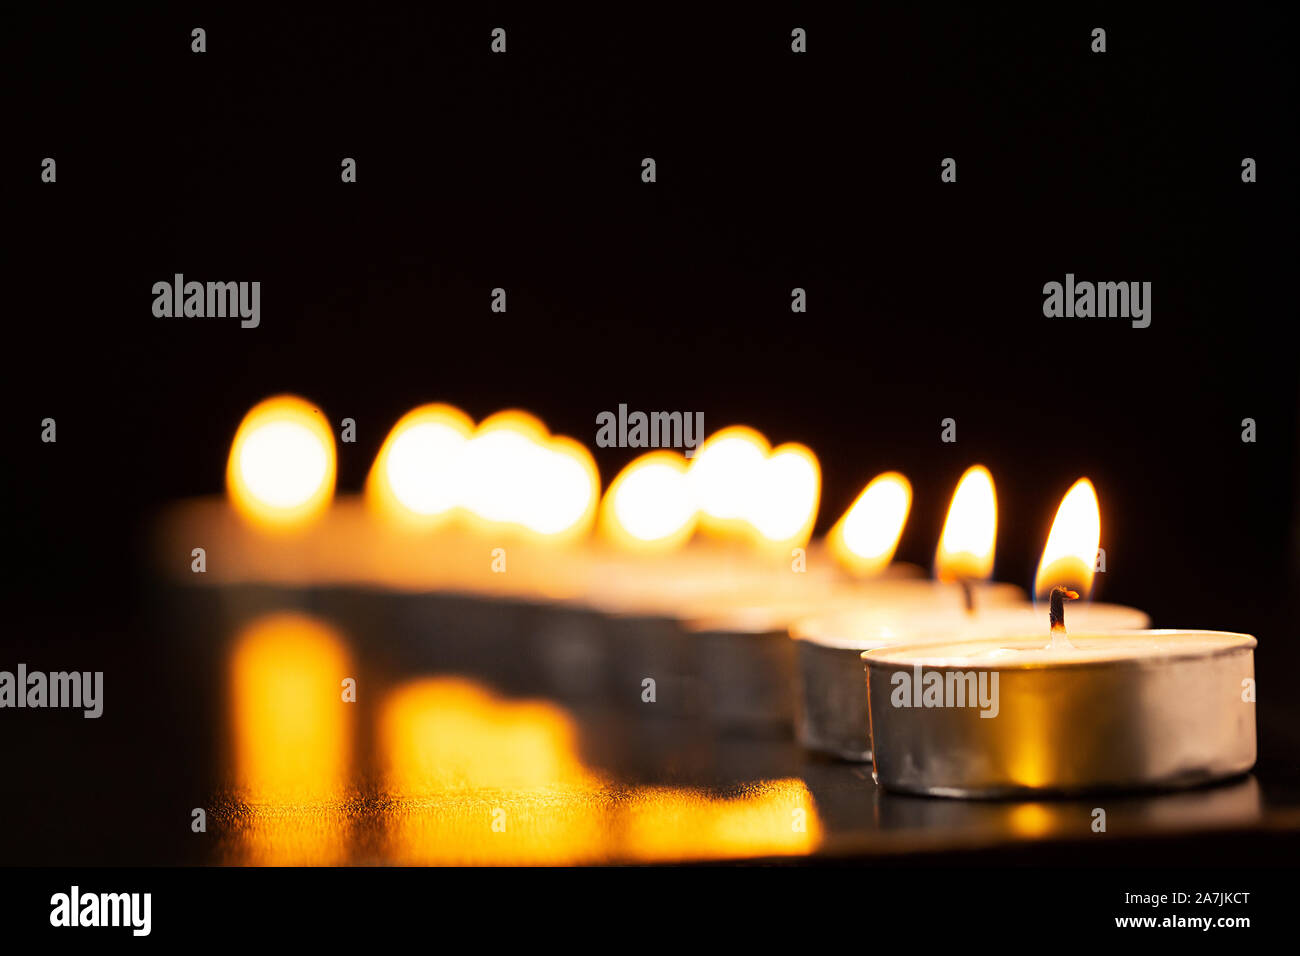 Candles in the night Line of candles Lighting Illuminated During Diwali Festival Celebration Nobody Stock Photo